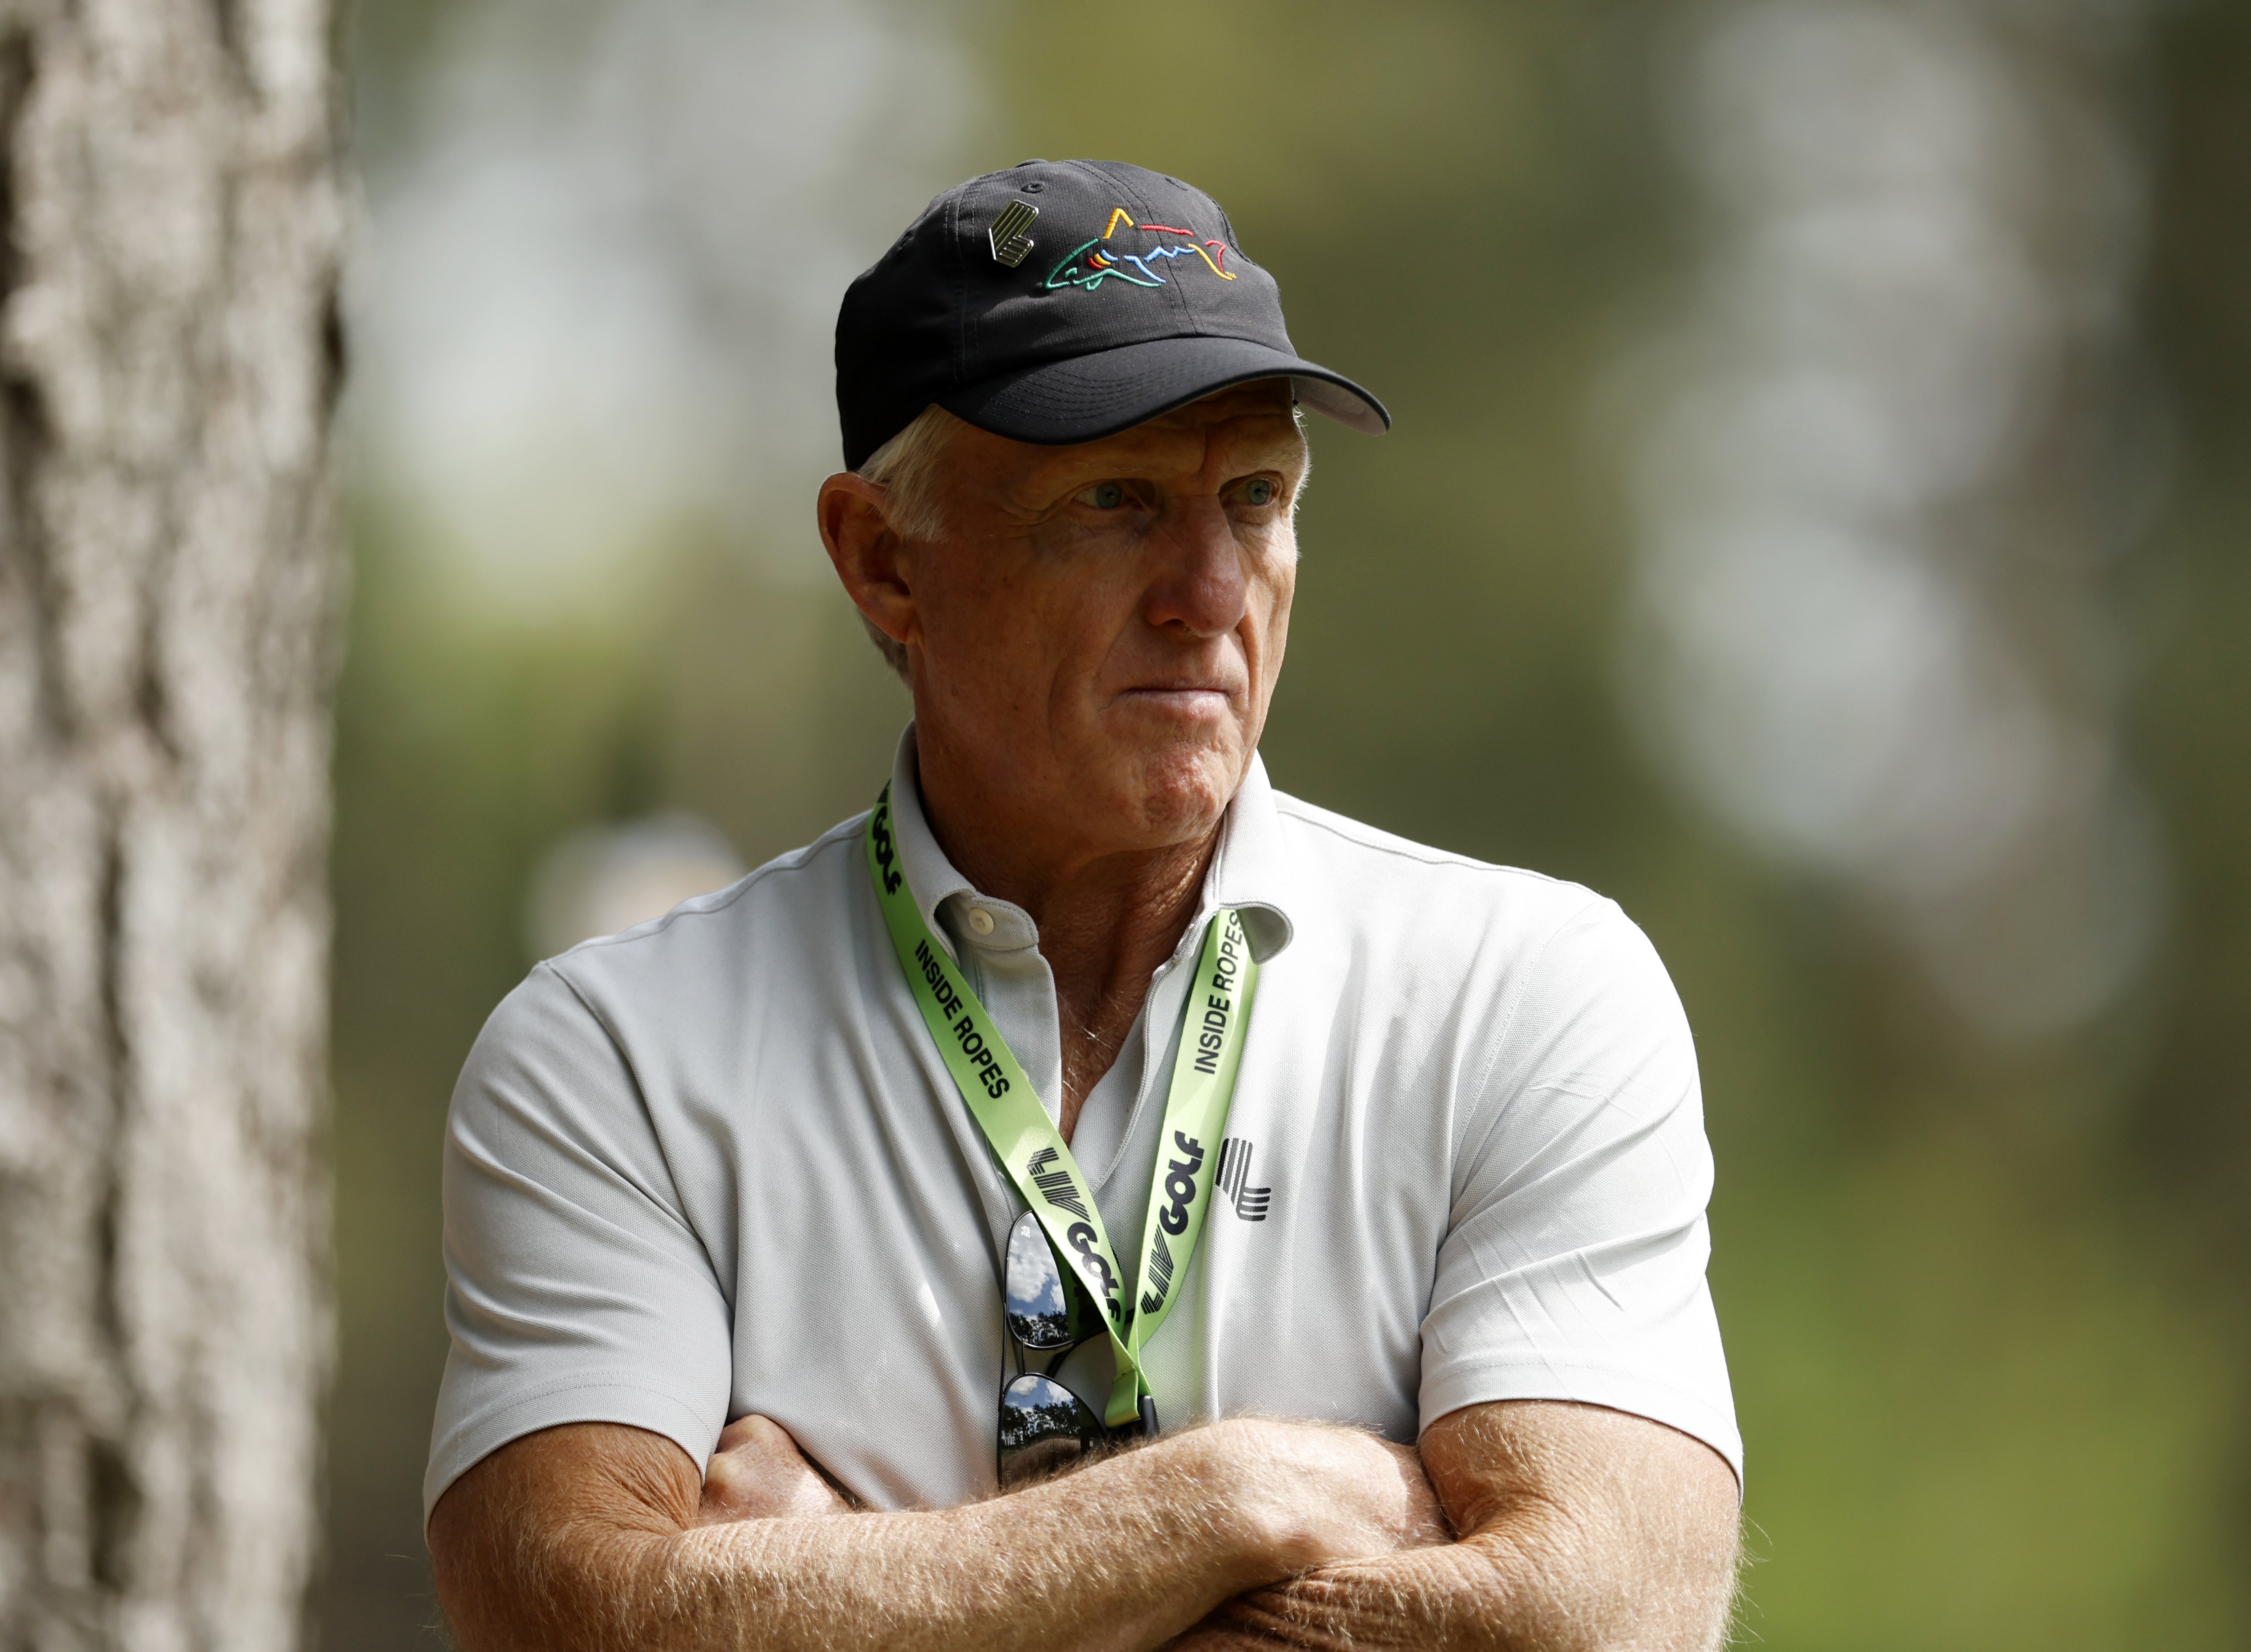 LIV Golf CEO Greg Norman during day two of the LIV Golf Invitational Series at the Centurion Club, Hertfordshire